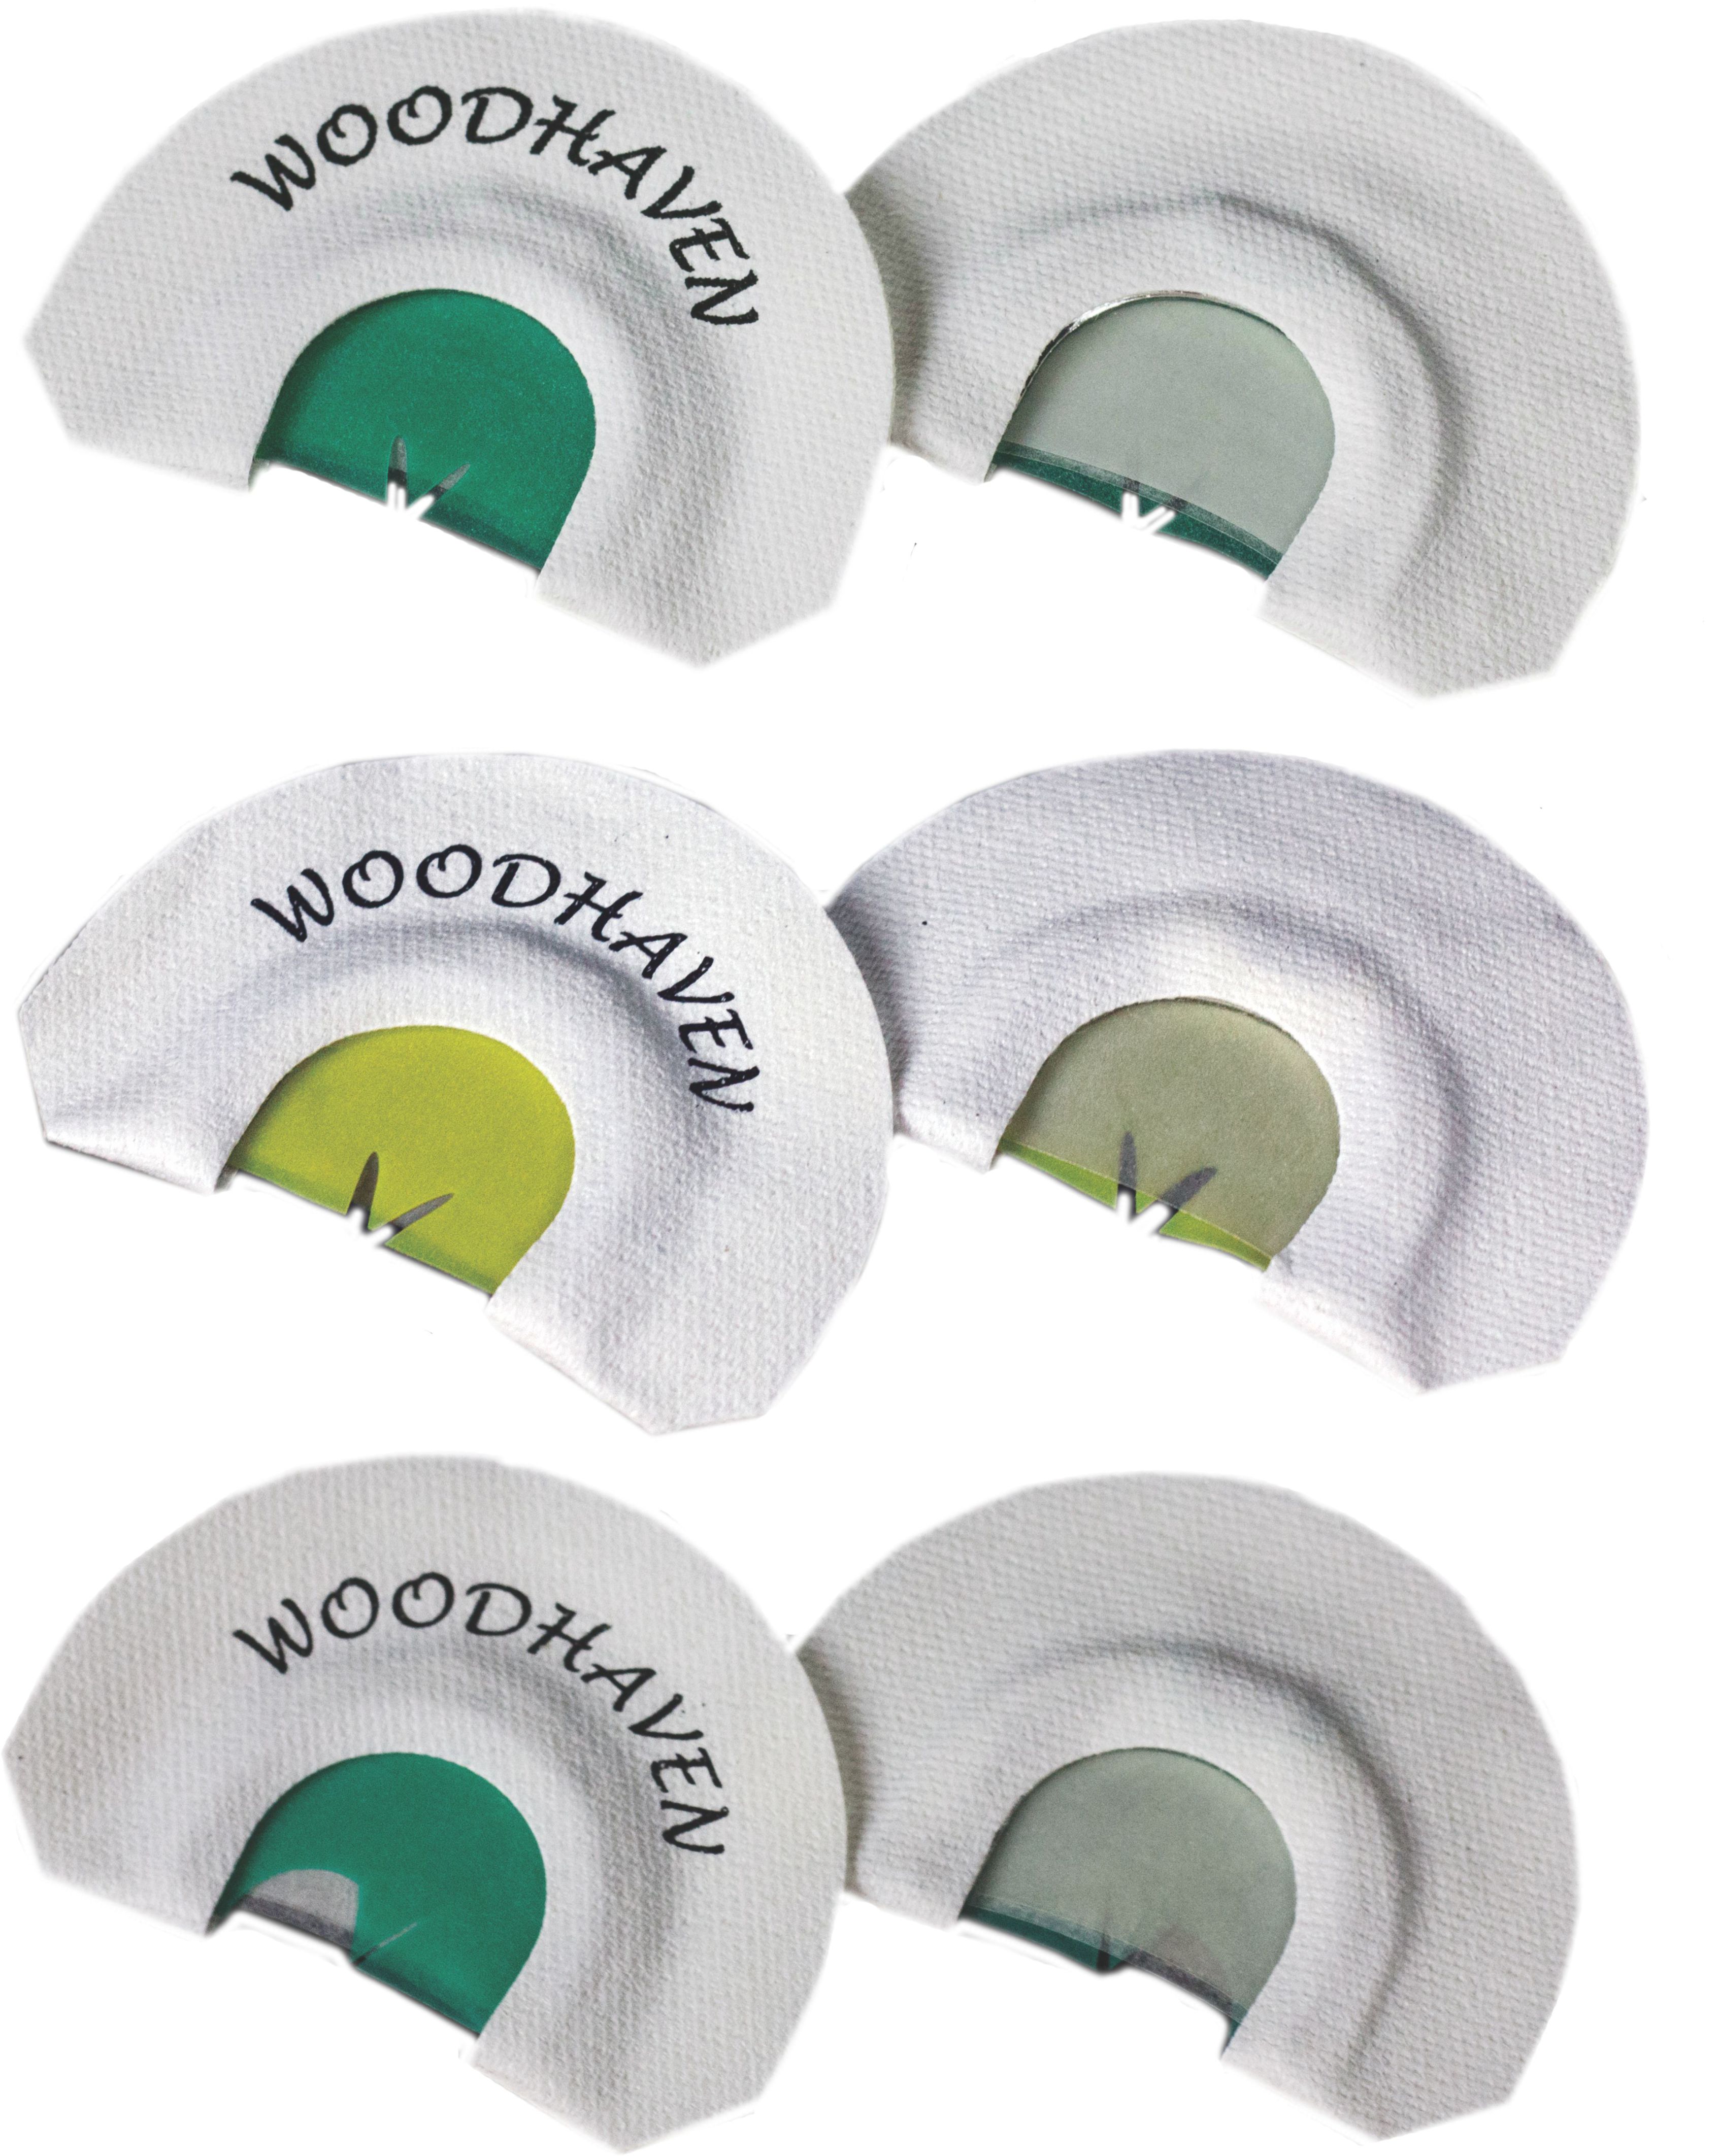 WoodHaven Top 3 ProPack Mouth Calls